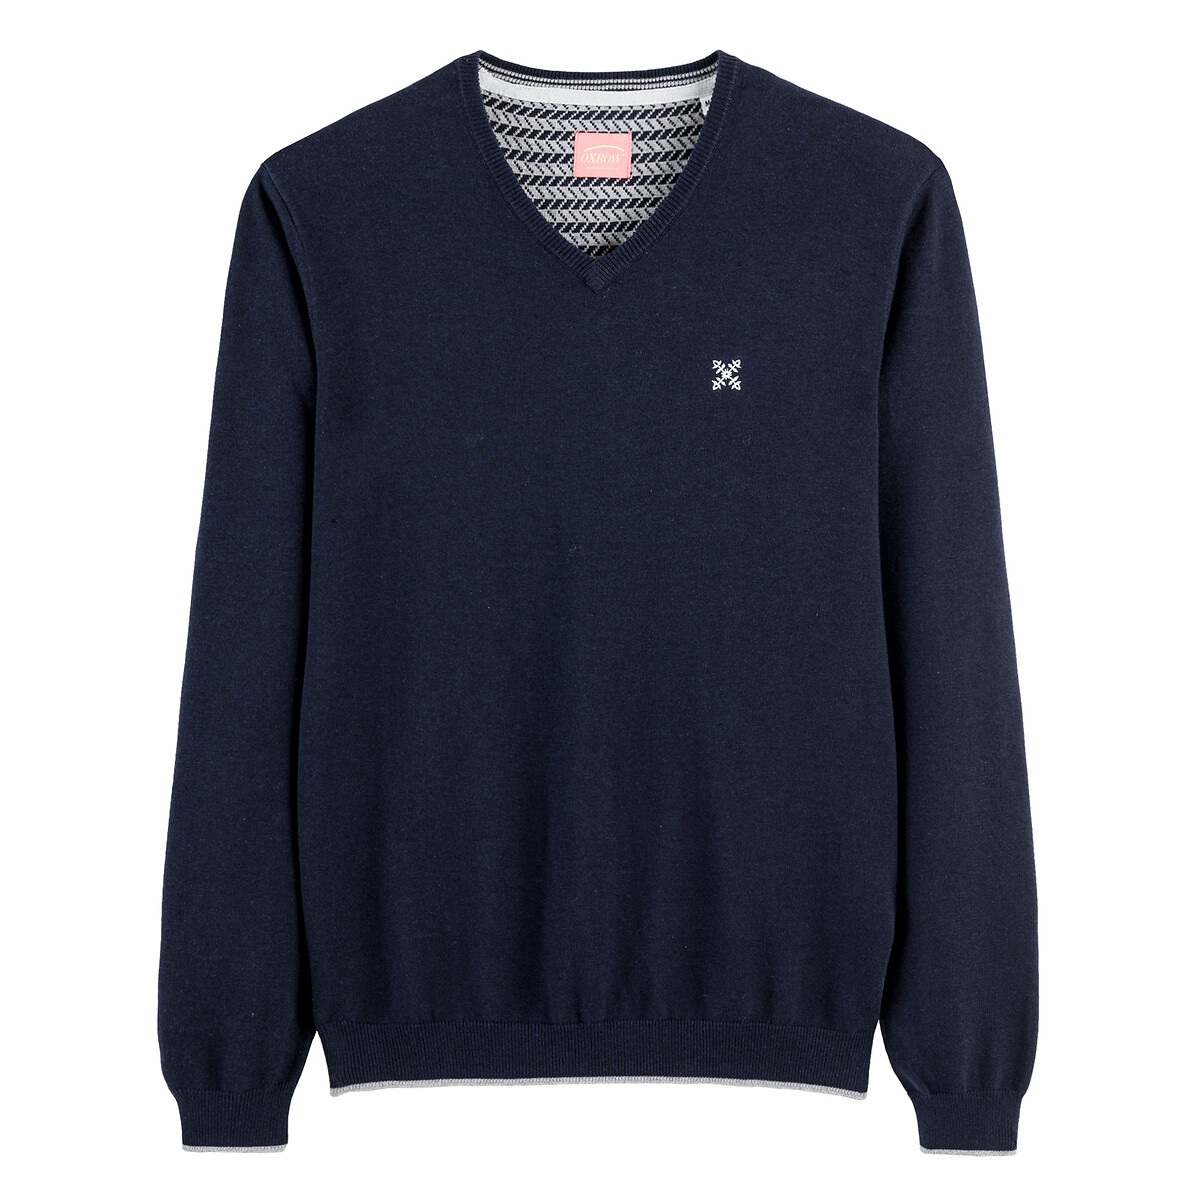 Cotton Essential Jumper with V-Neck